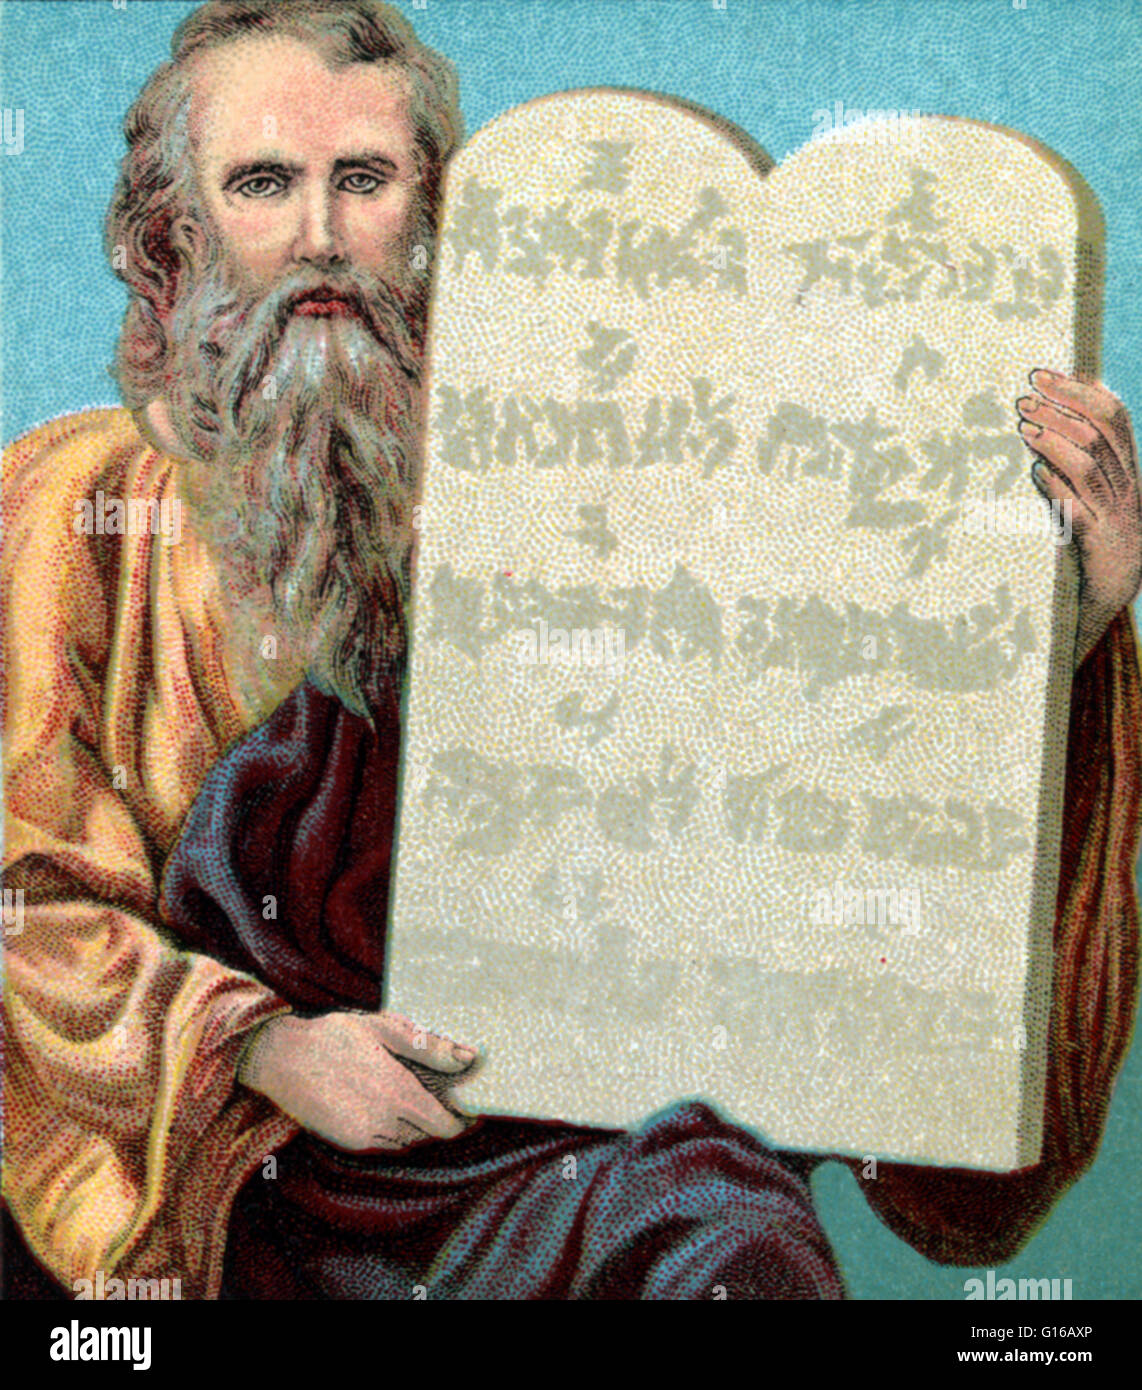 One of thirteen lithographs with scenes from Old Testament Biblical stories about Moses's life. The back of each card has a Bible lesson pertaining to the image on the front. Published by American Baptist Publication Society, 1907. According to the story Stock Photo